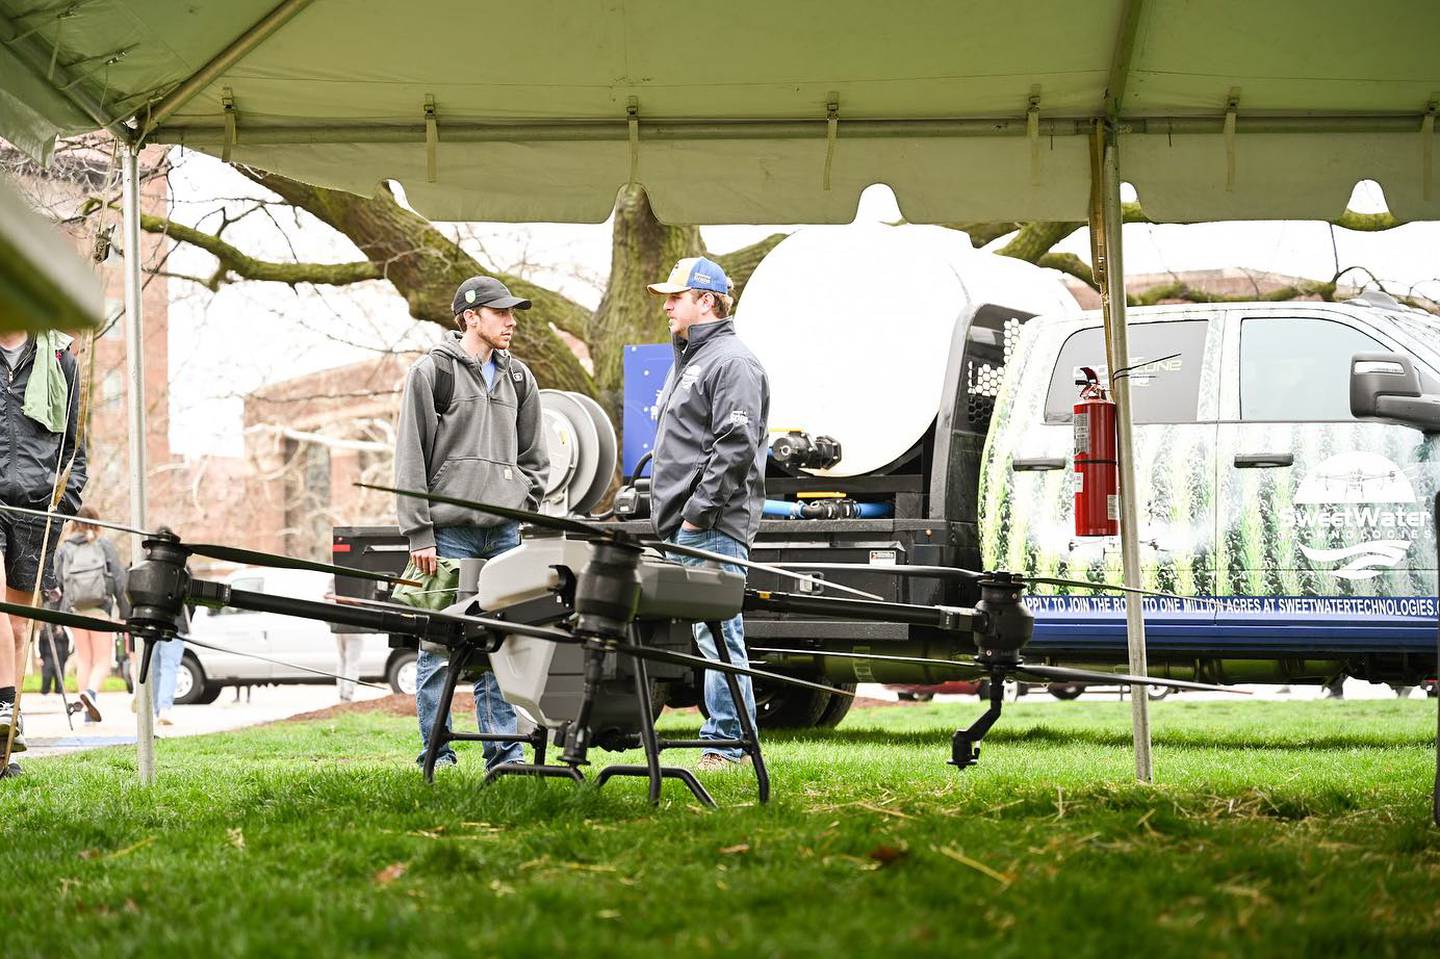 Drones and other ag technologies were featured on Tech Tuesday.